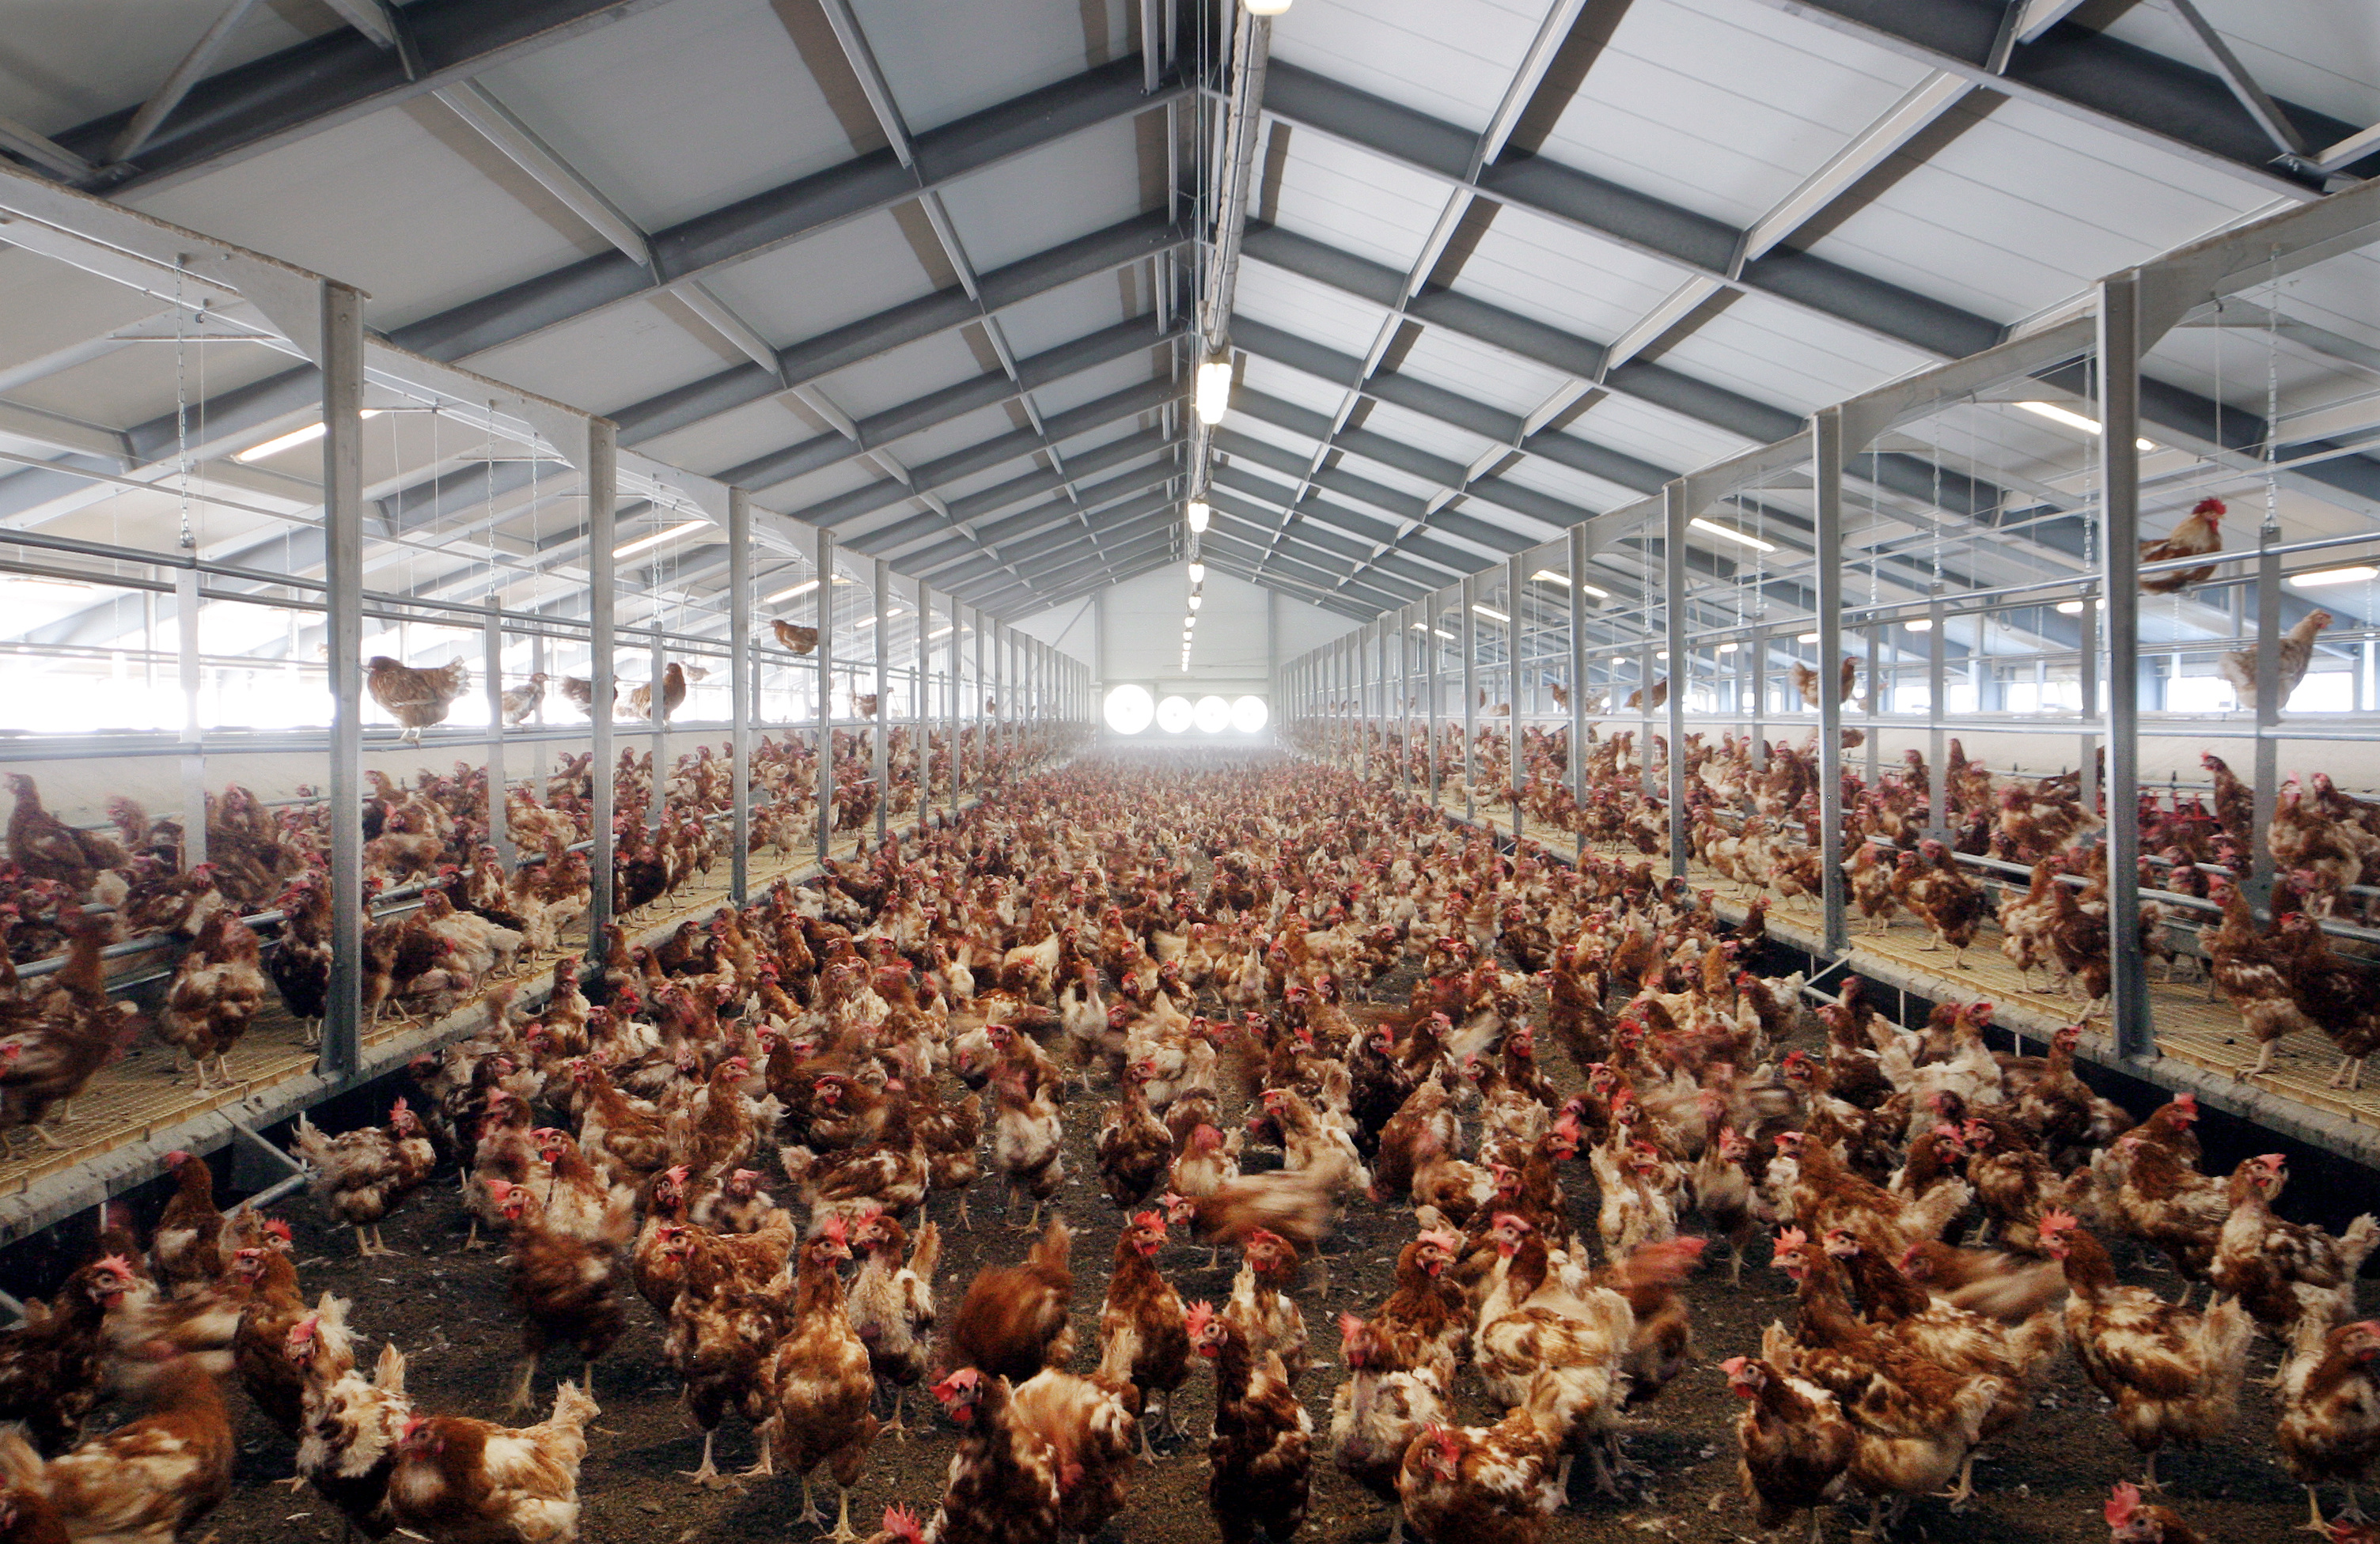 thousands of chickens in a cage-free barn